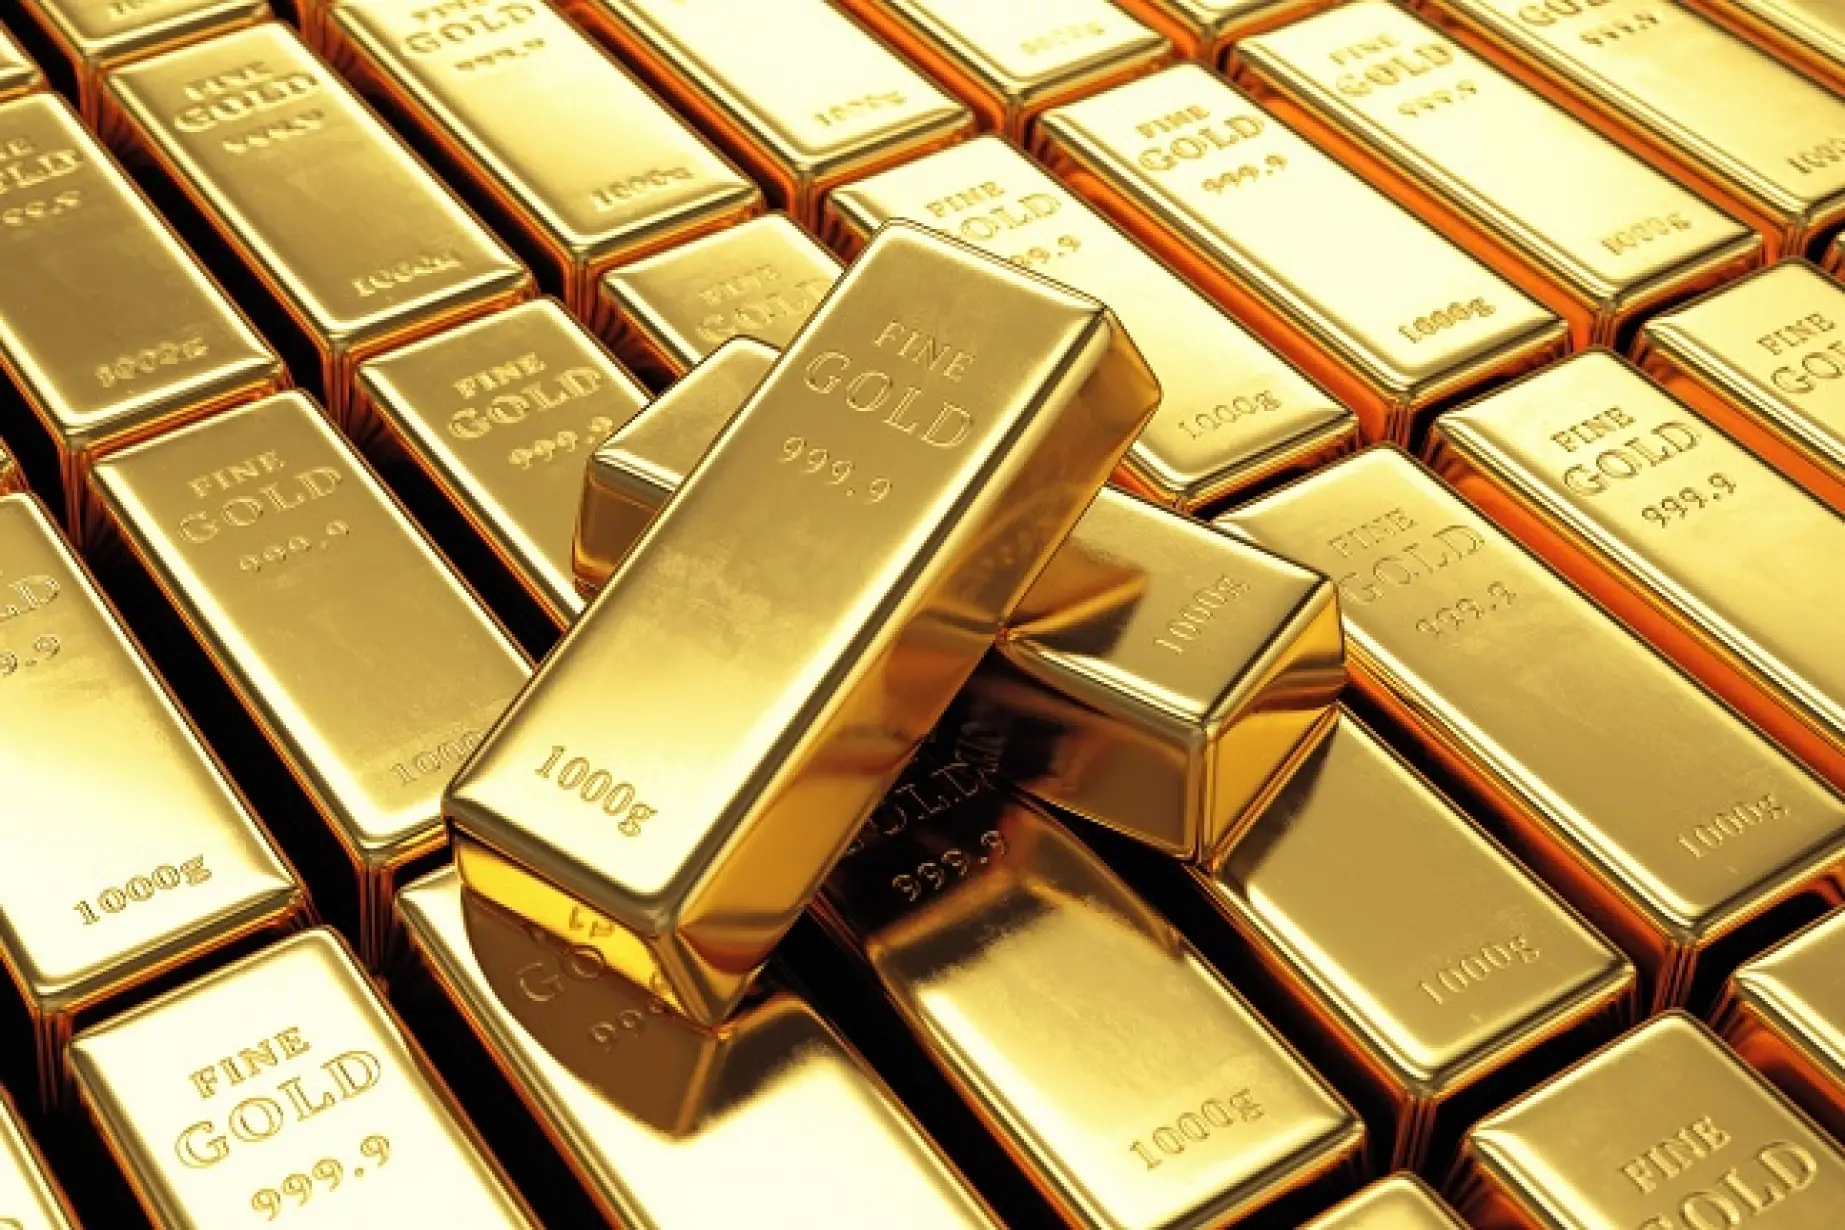 NSE launches 'Gold Options' in commodity derivatives segment

Mumbai May '